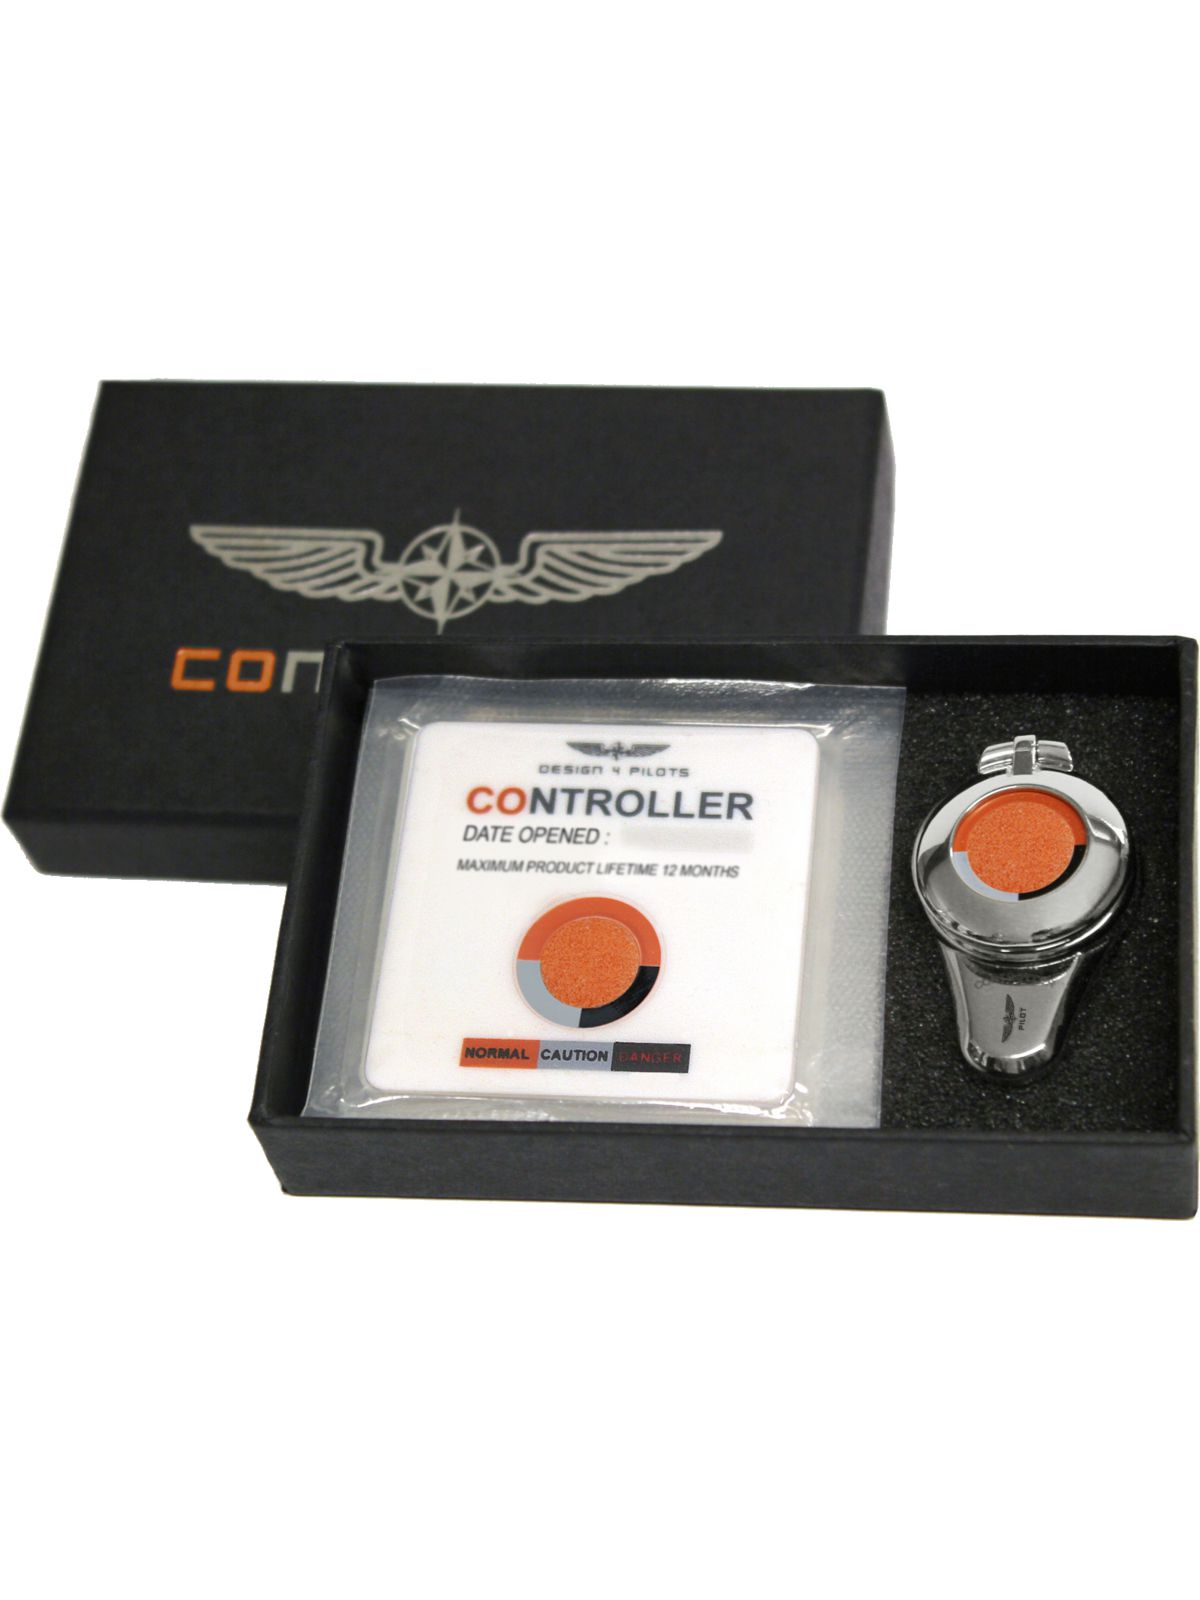 PILOT CONTROLLER Kit - CO Detector with Kneeboard Adapter